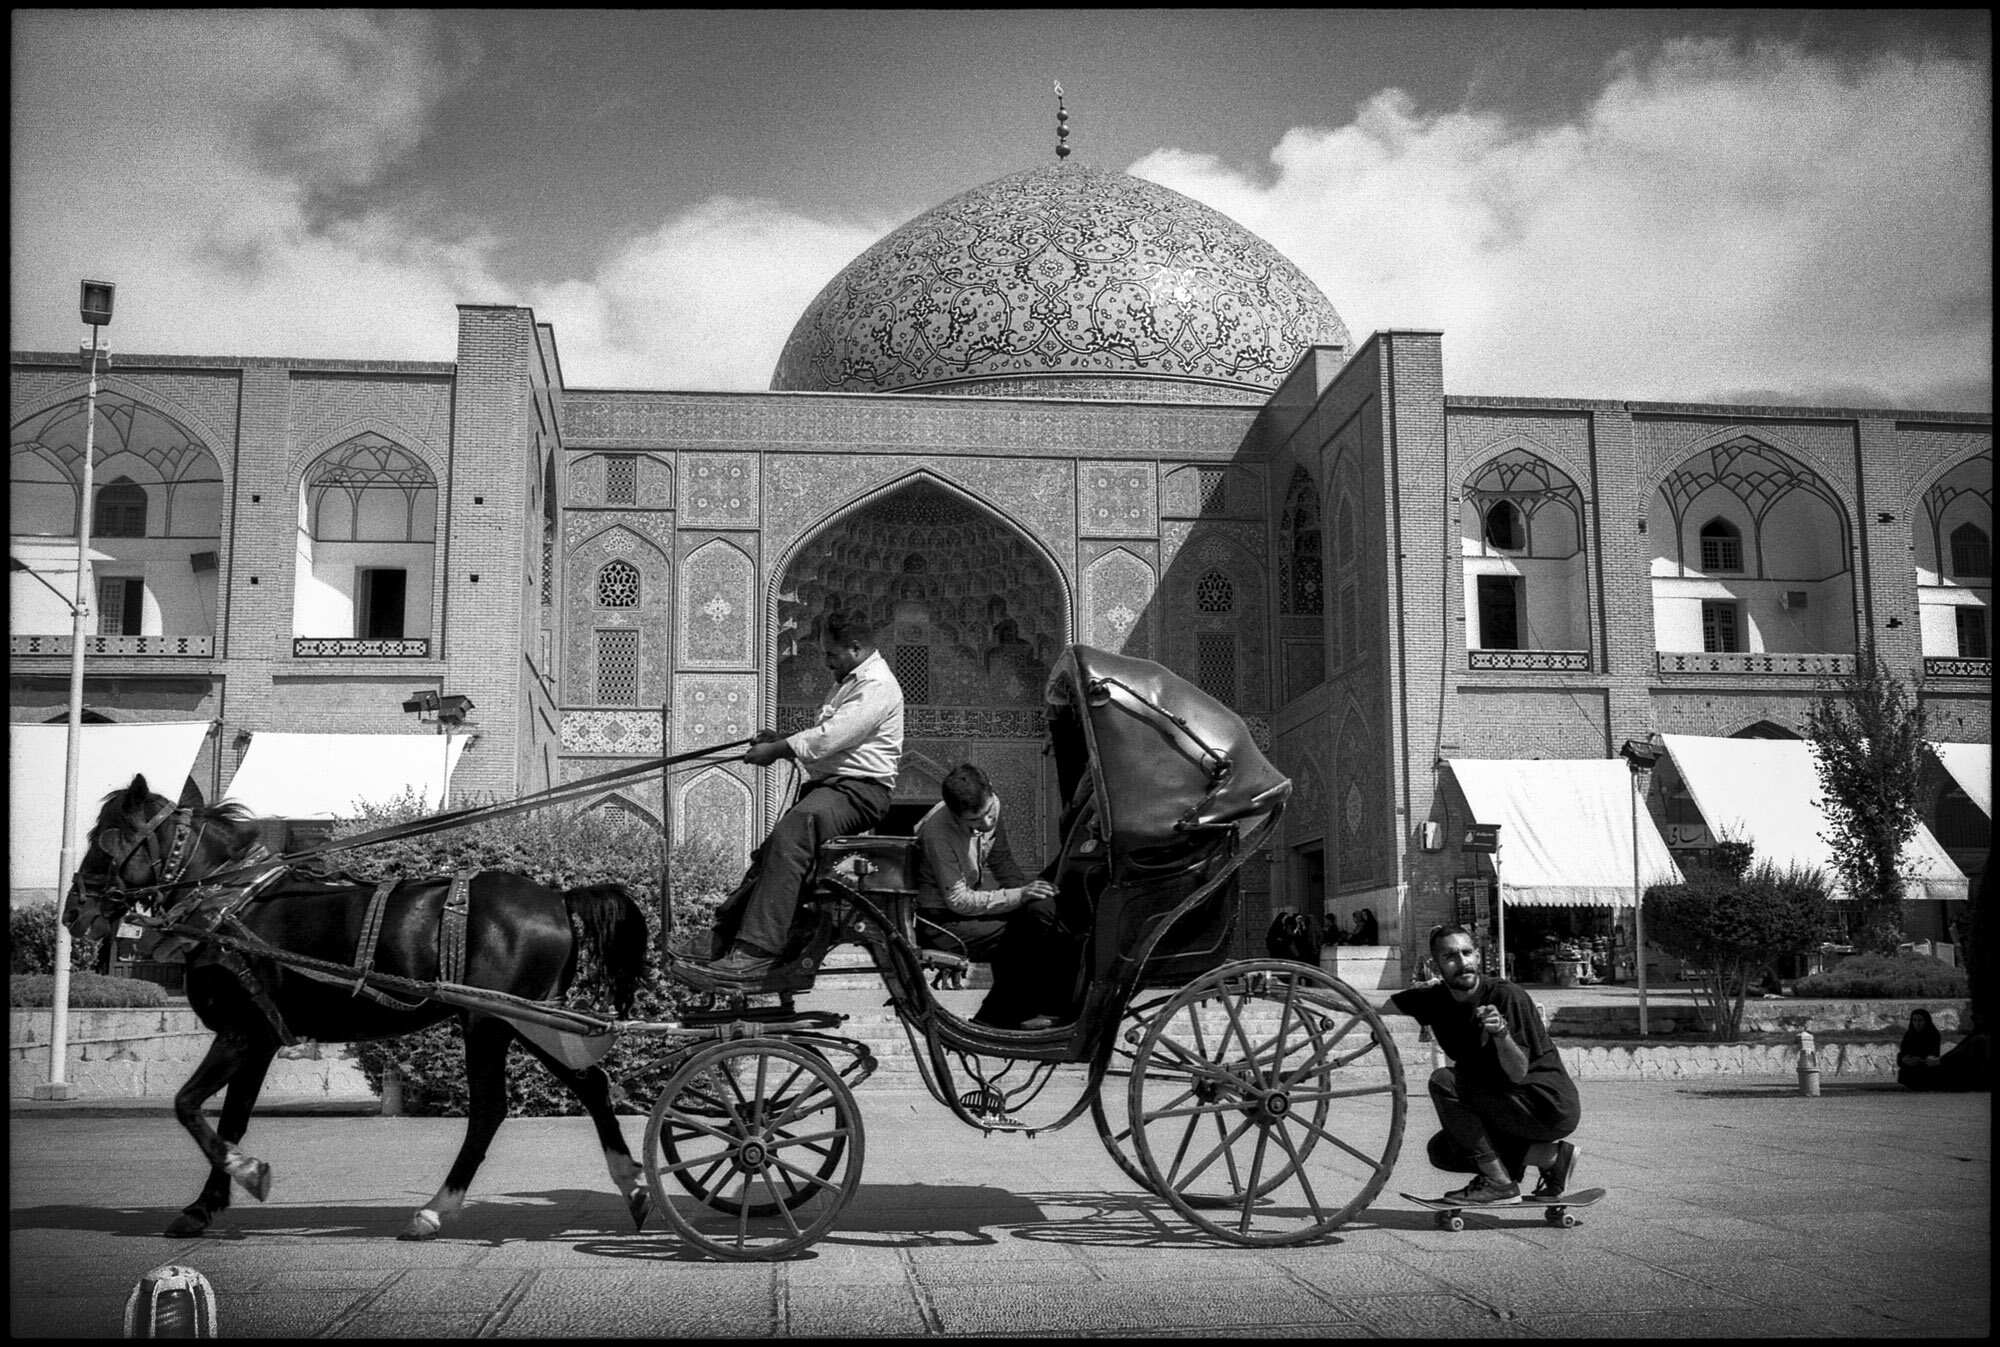  Erfan is towed by a horse-drawn carriage on Naghsh-e Jahan square in Isfahan, Iran, on September 28, 2015. 